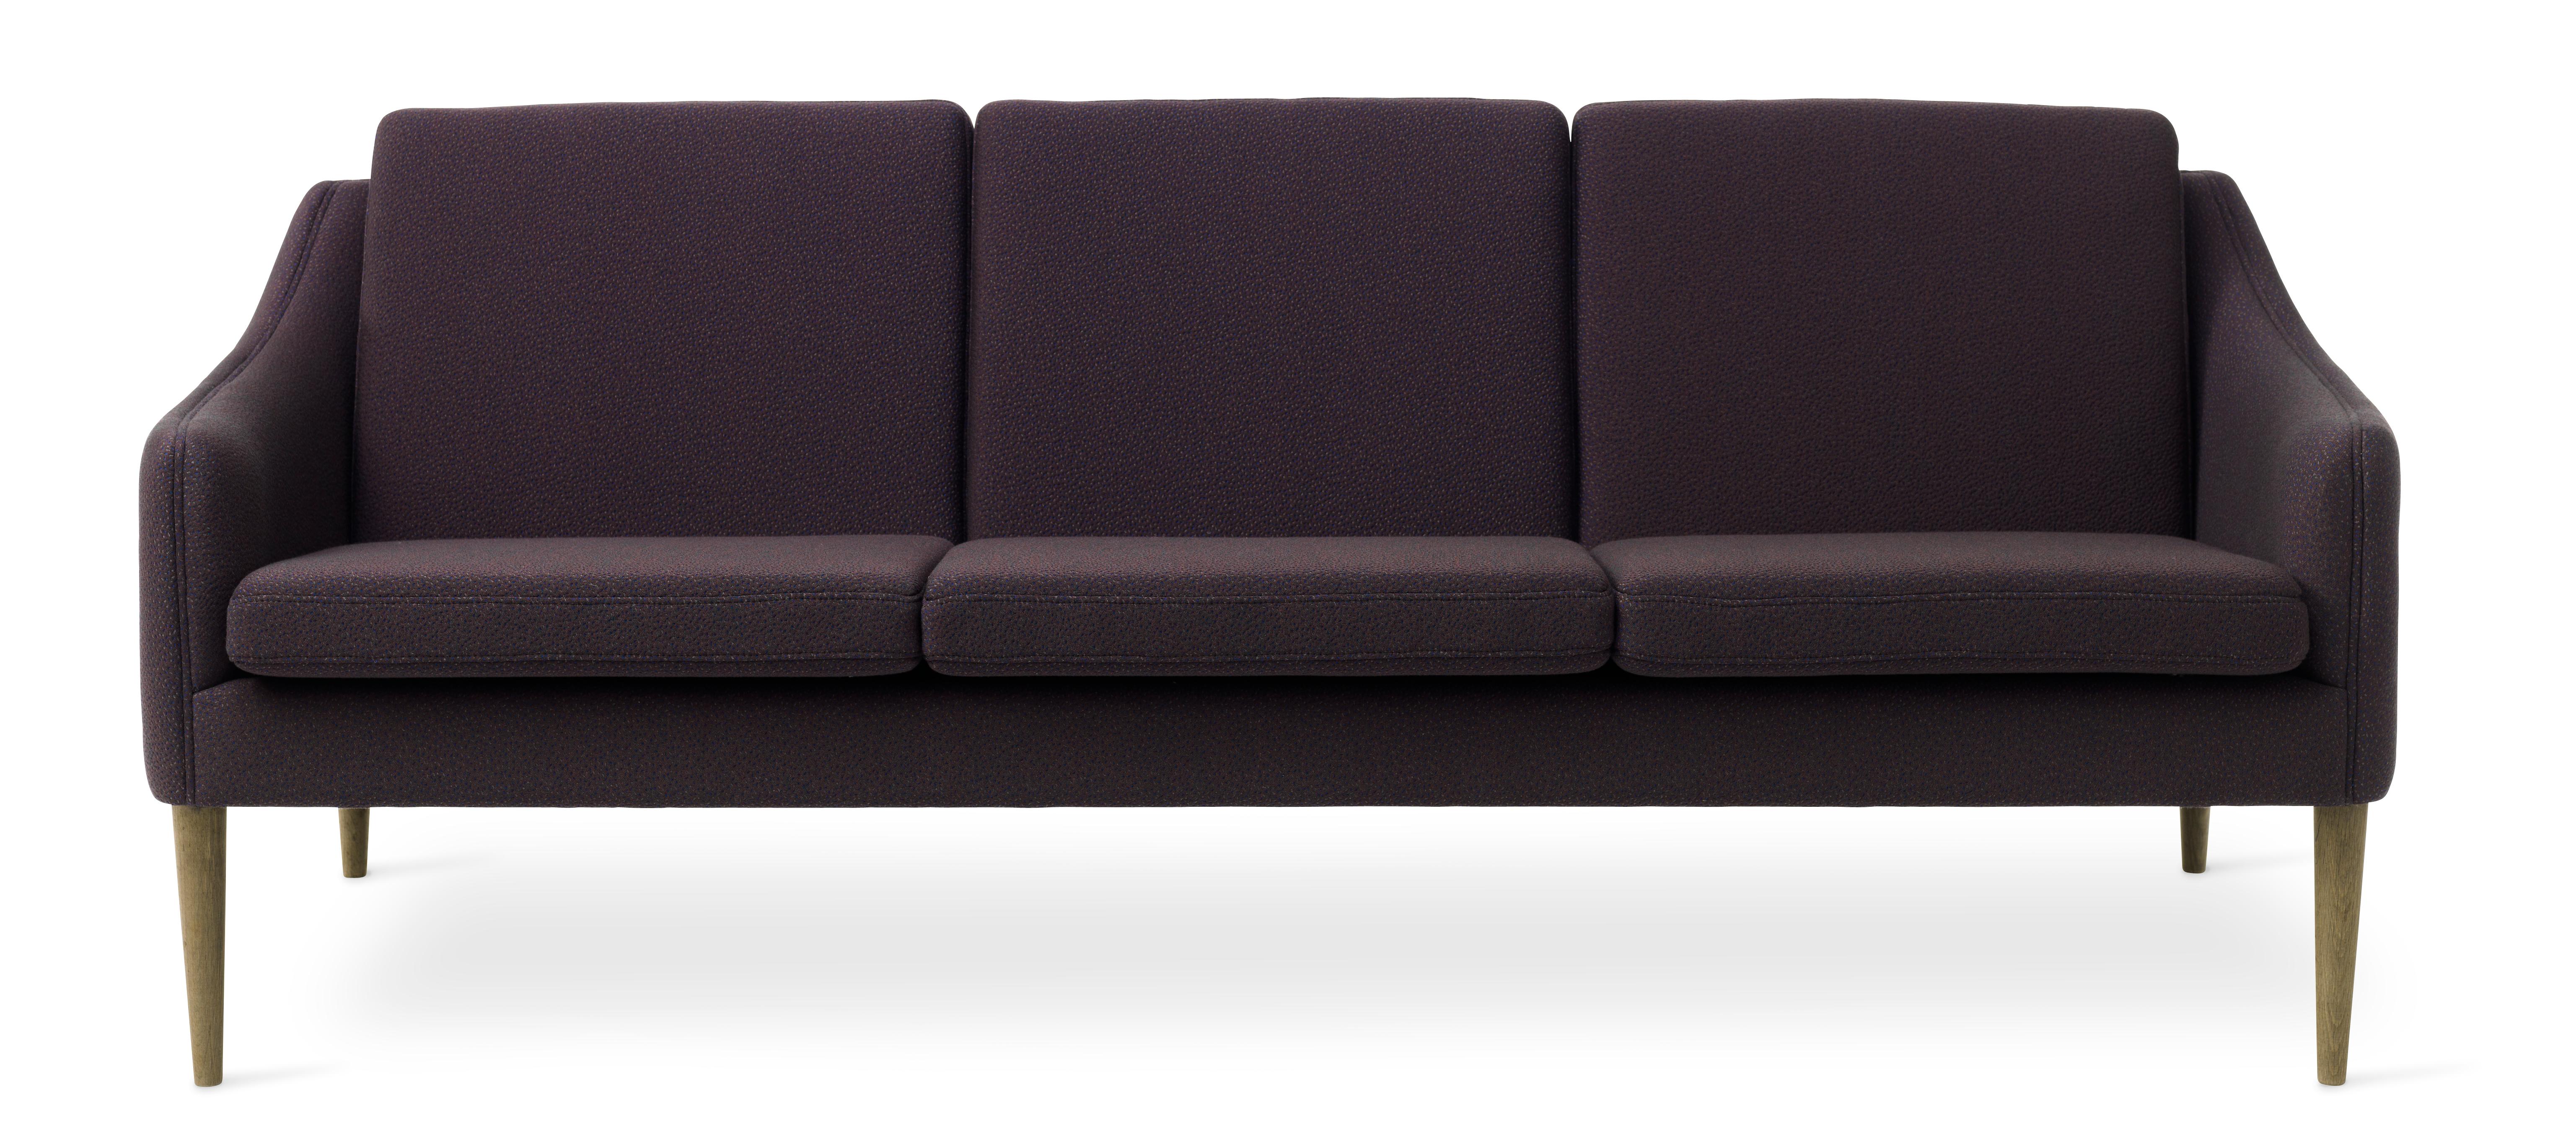 For Sale: Purple (Sprinkles 694) Mr. Olsen 3-Seat Sofa with Smoked Oak Legs, by Hans Olsen from Warm Nordic